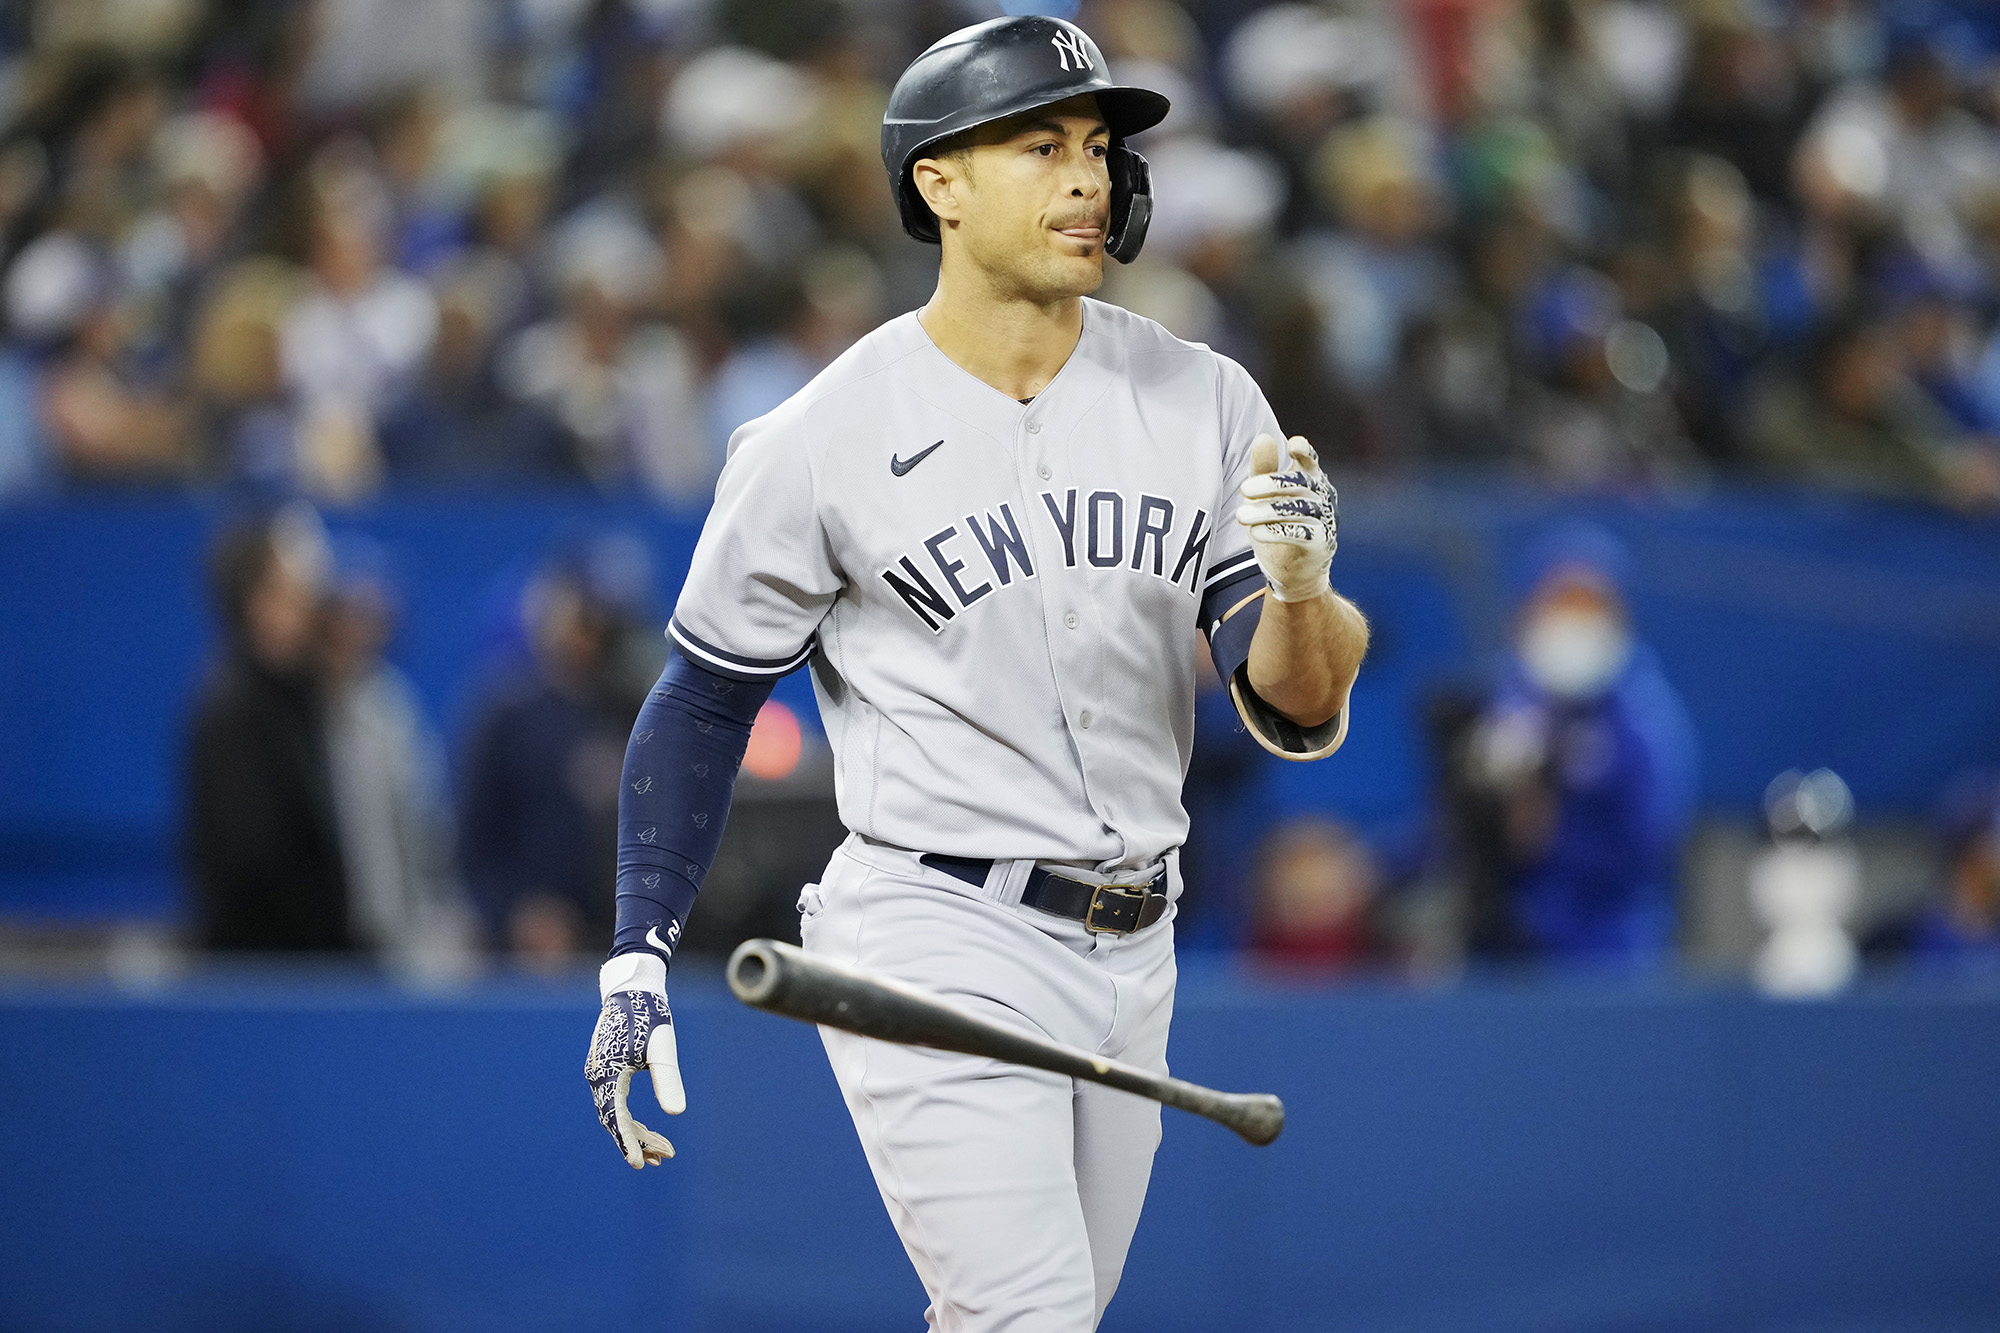 Yankees giancarlo stanton is the real mvp right now